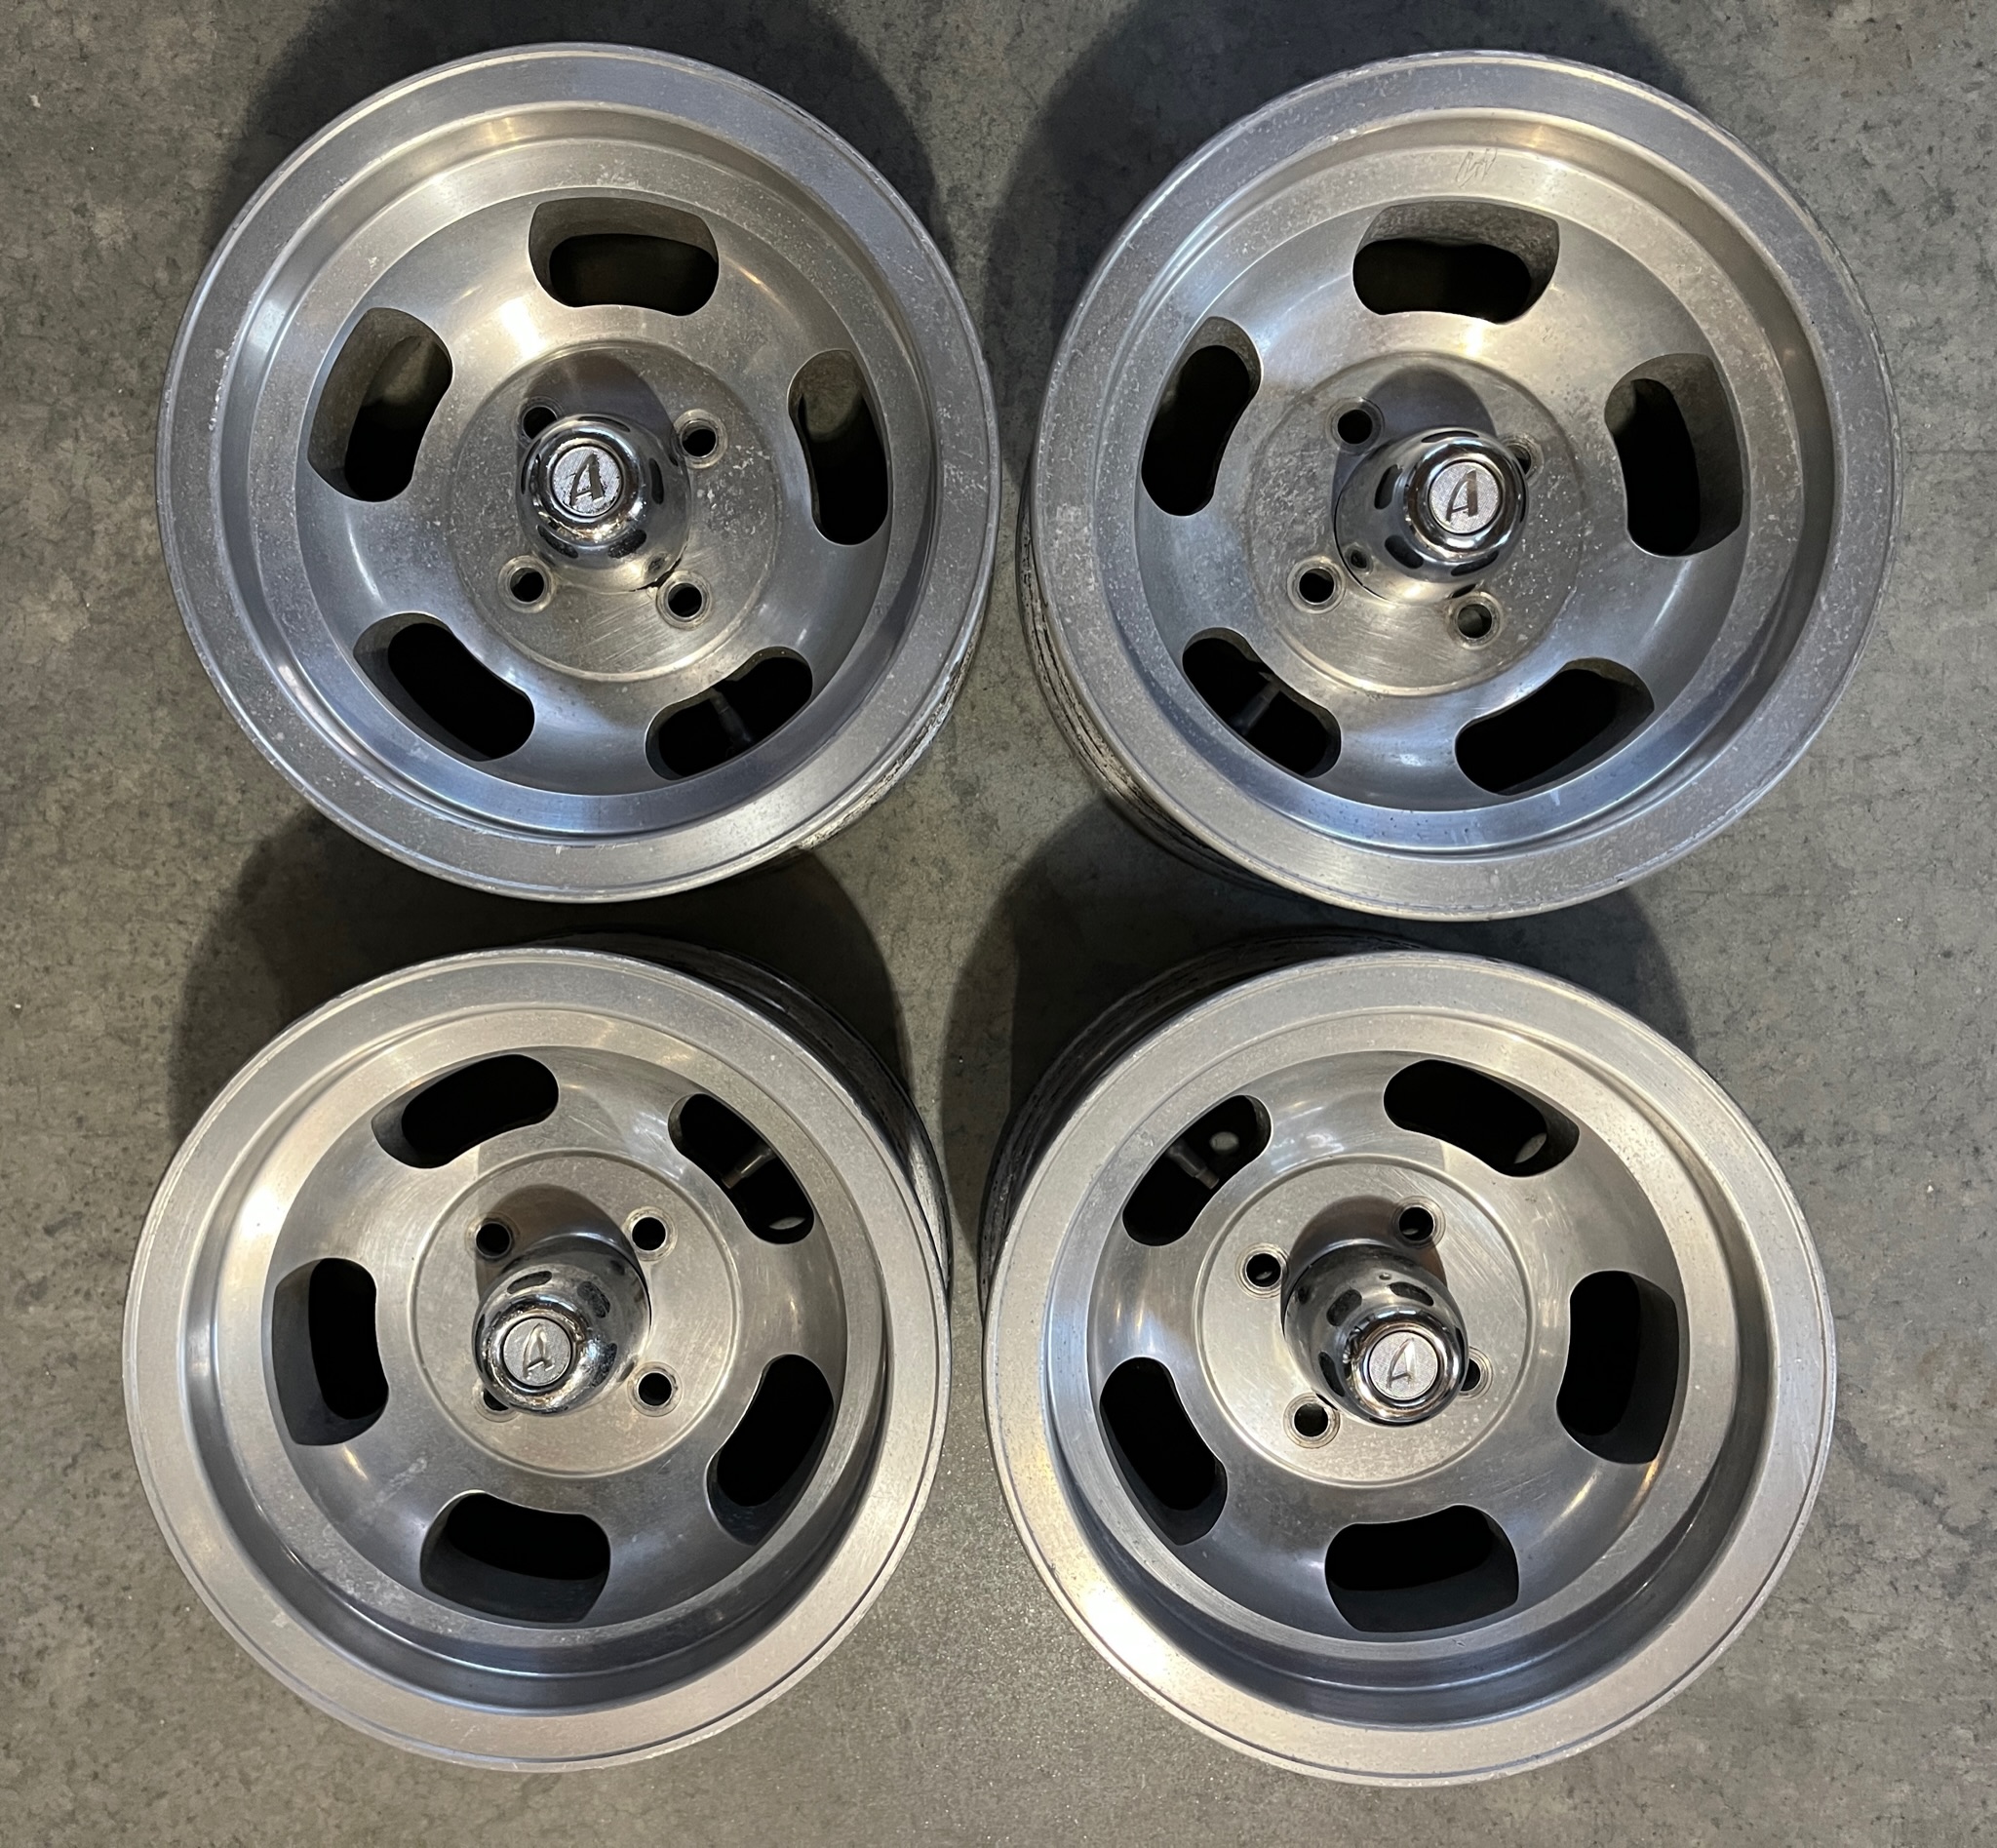 Ansen 14x7 slotted mag wheels with center caps